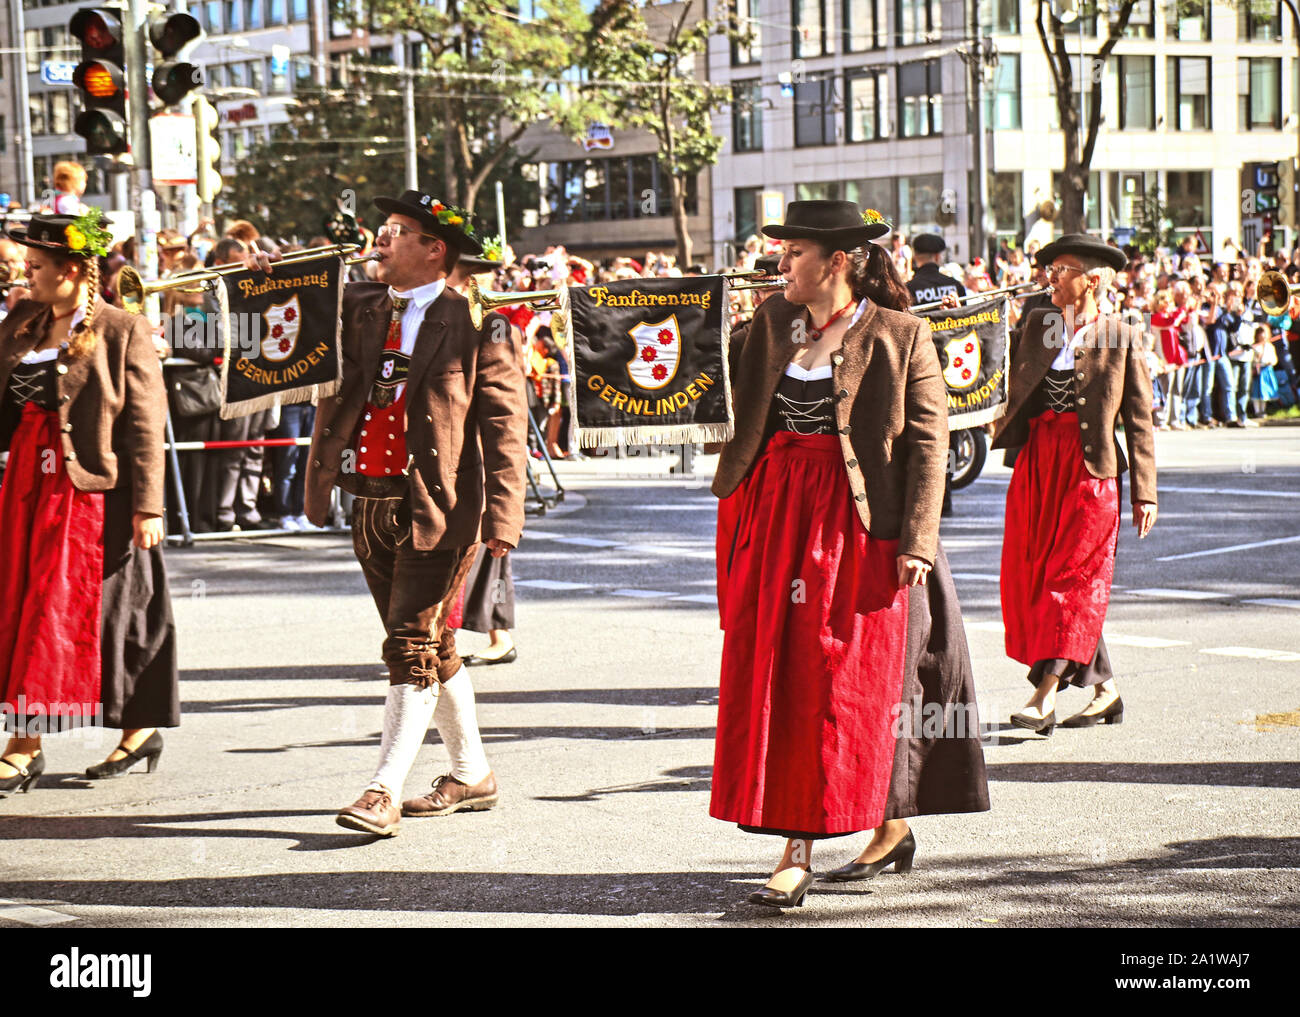 MUNICH, GERMANY - SEPTEMBER 22, 2019 Grand entry of the Oktoberfest landlords and breweries, festive parade of magnificent decorated carriages and ban Stock Photo